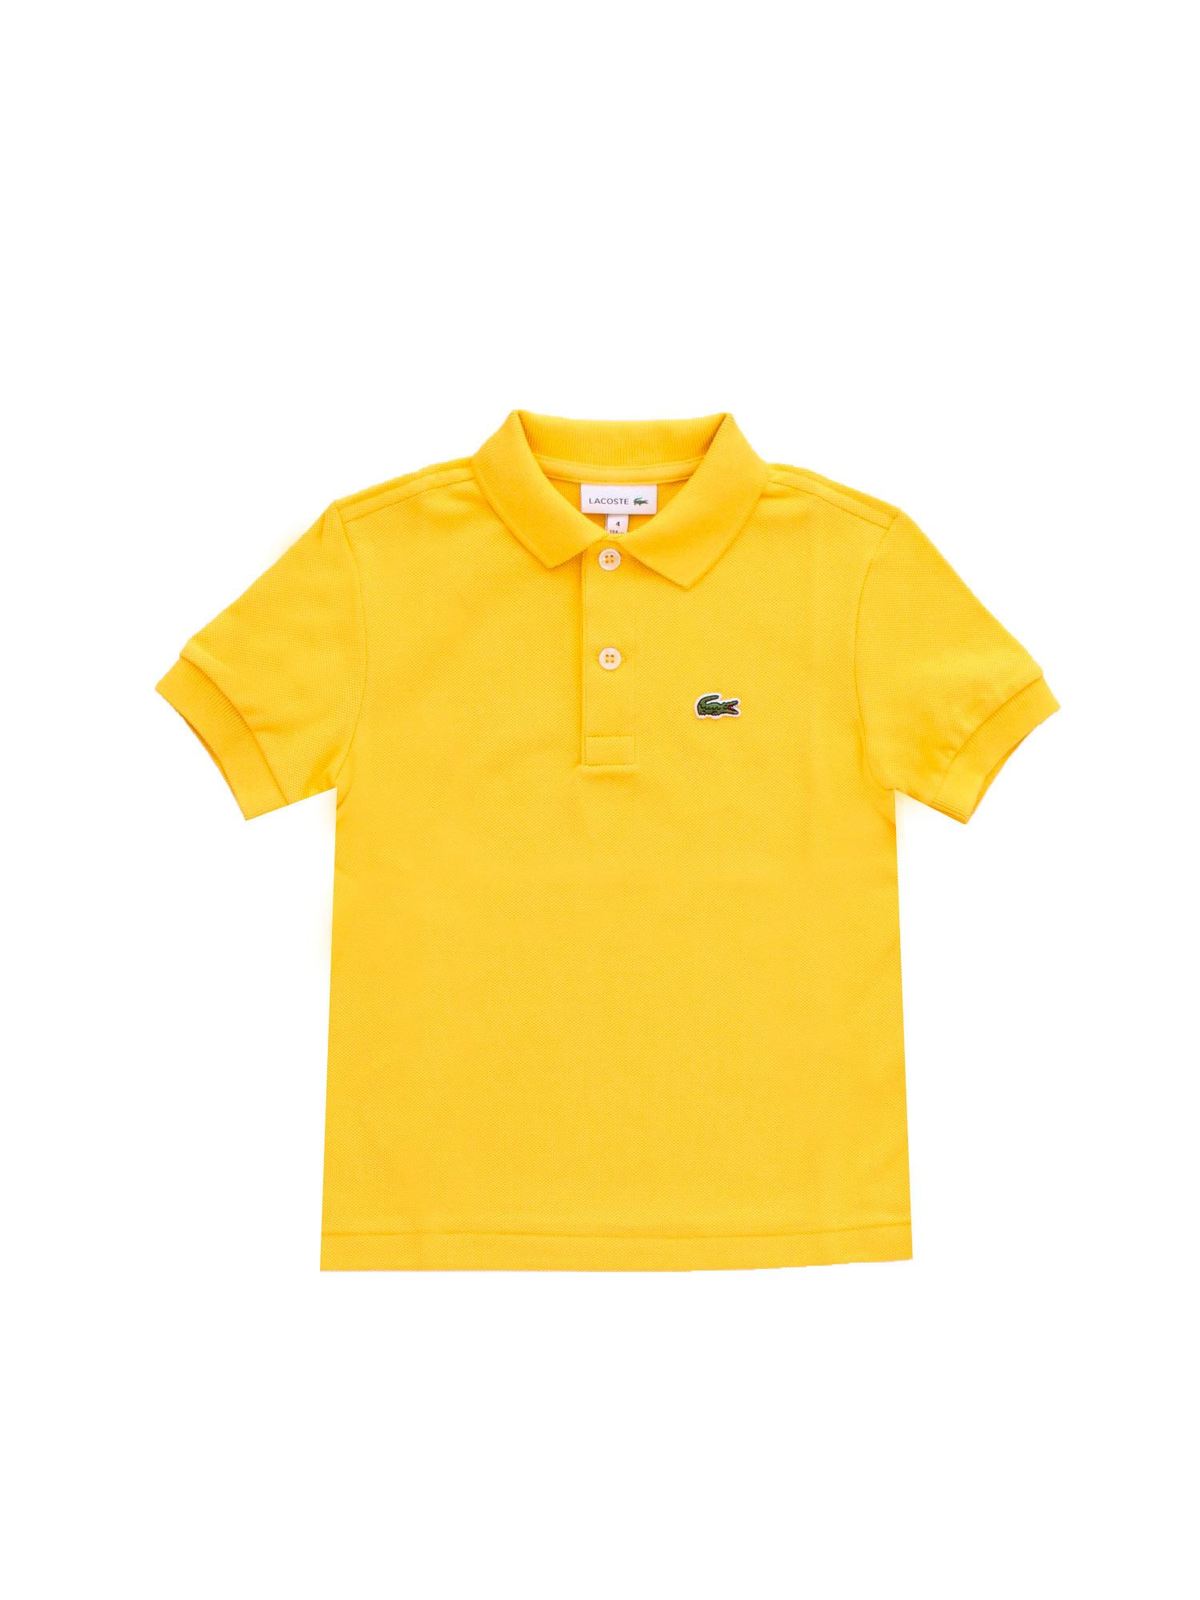 LACOSTE LOGO PATCH POLO SHIRT IN YELLOW